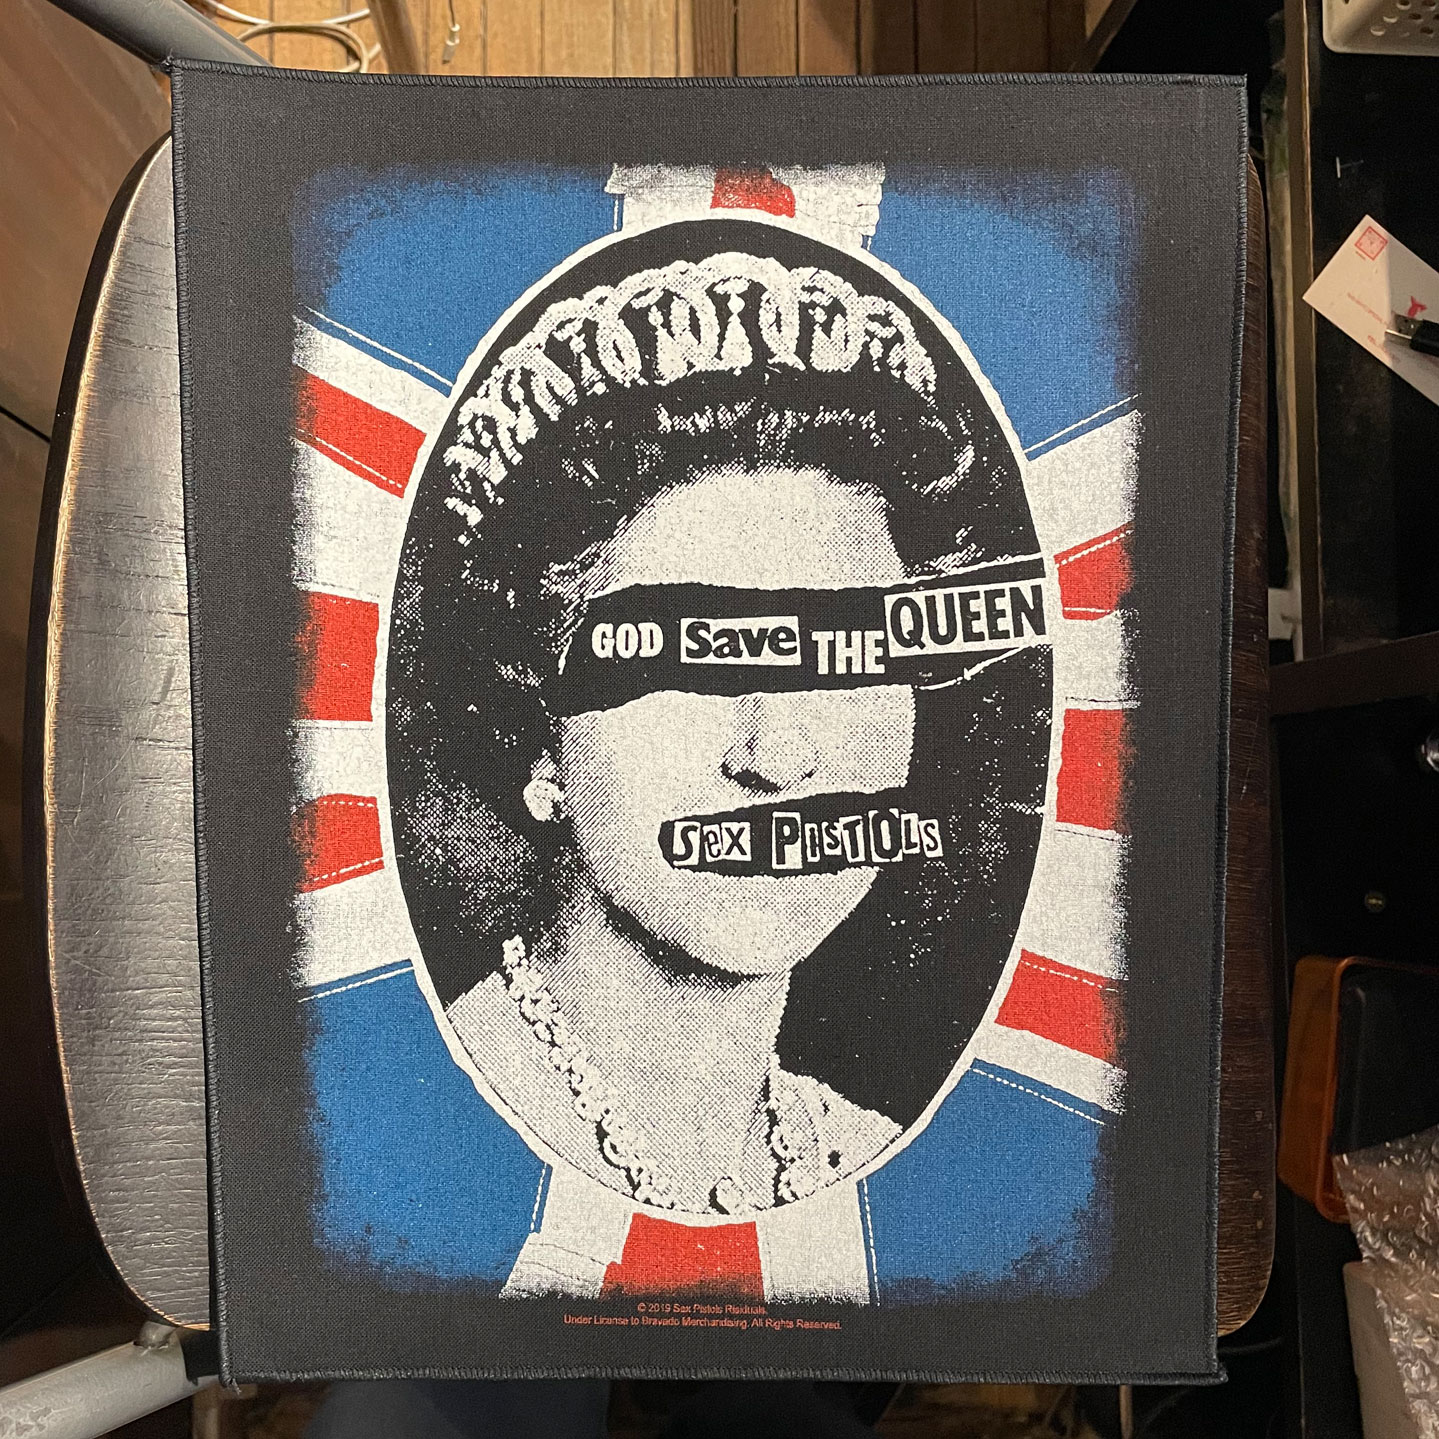 SEX PISTOLS BACKPATCH GOD SAVE THE QUEEN